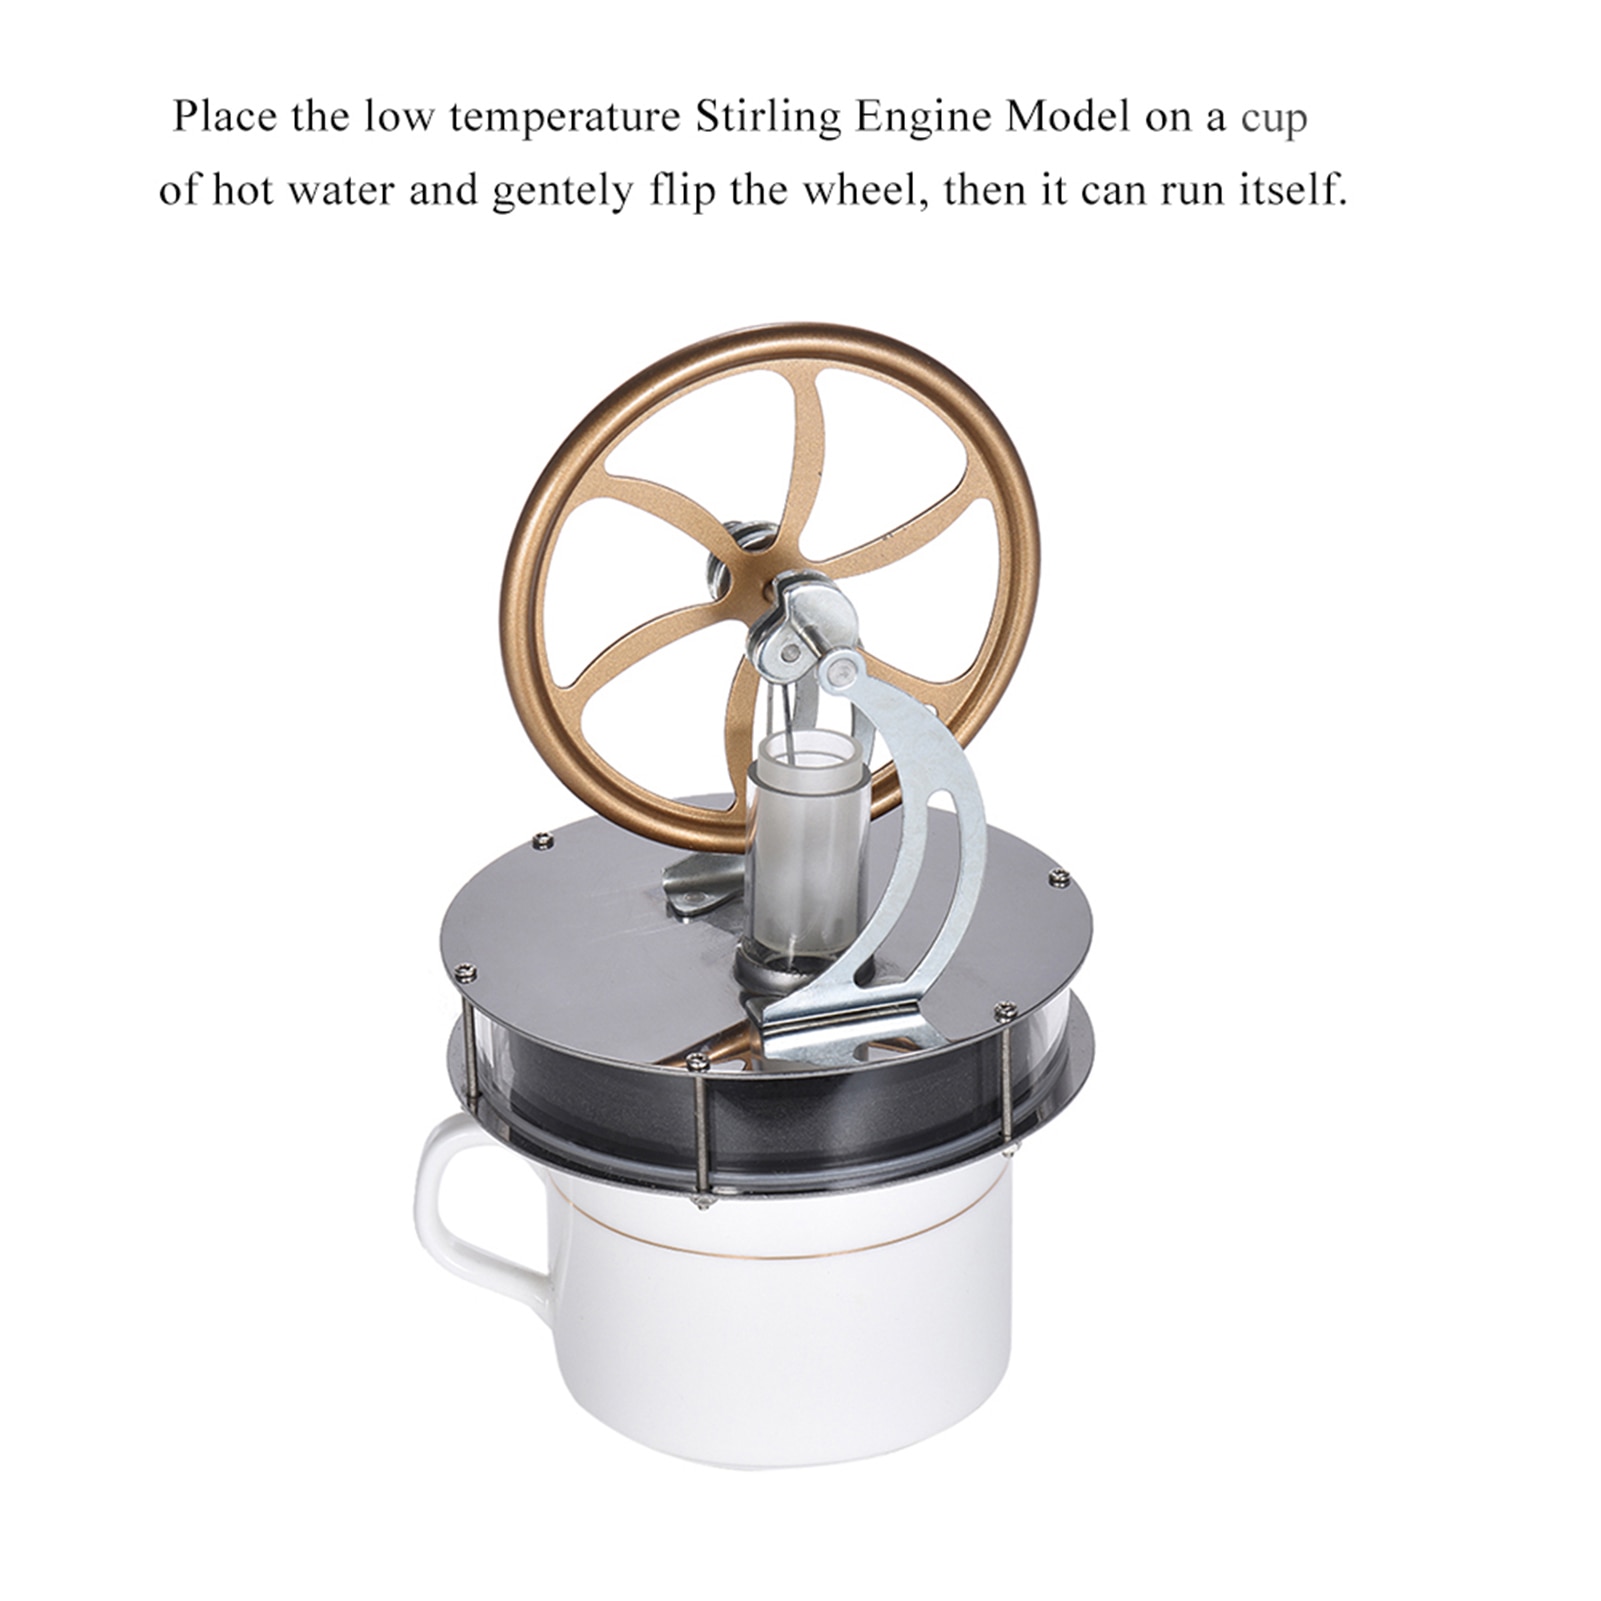 Low Temperature Mini Air Stirling Engine Motor Model Heat Steam Arrival Stainless Steel Education Toy 3